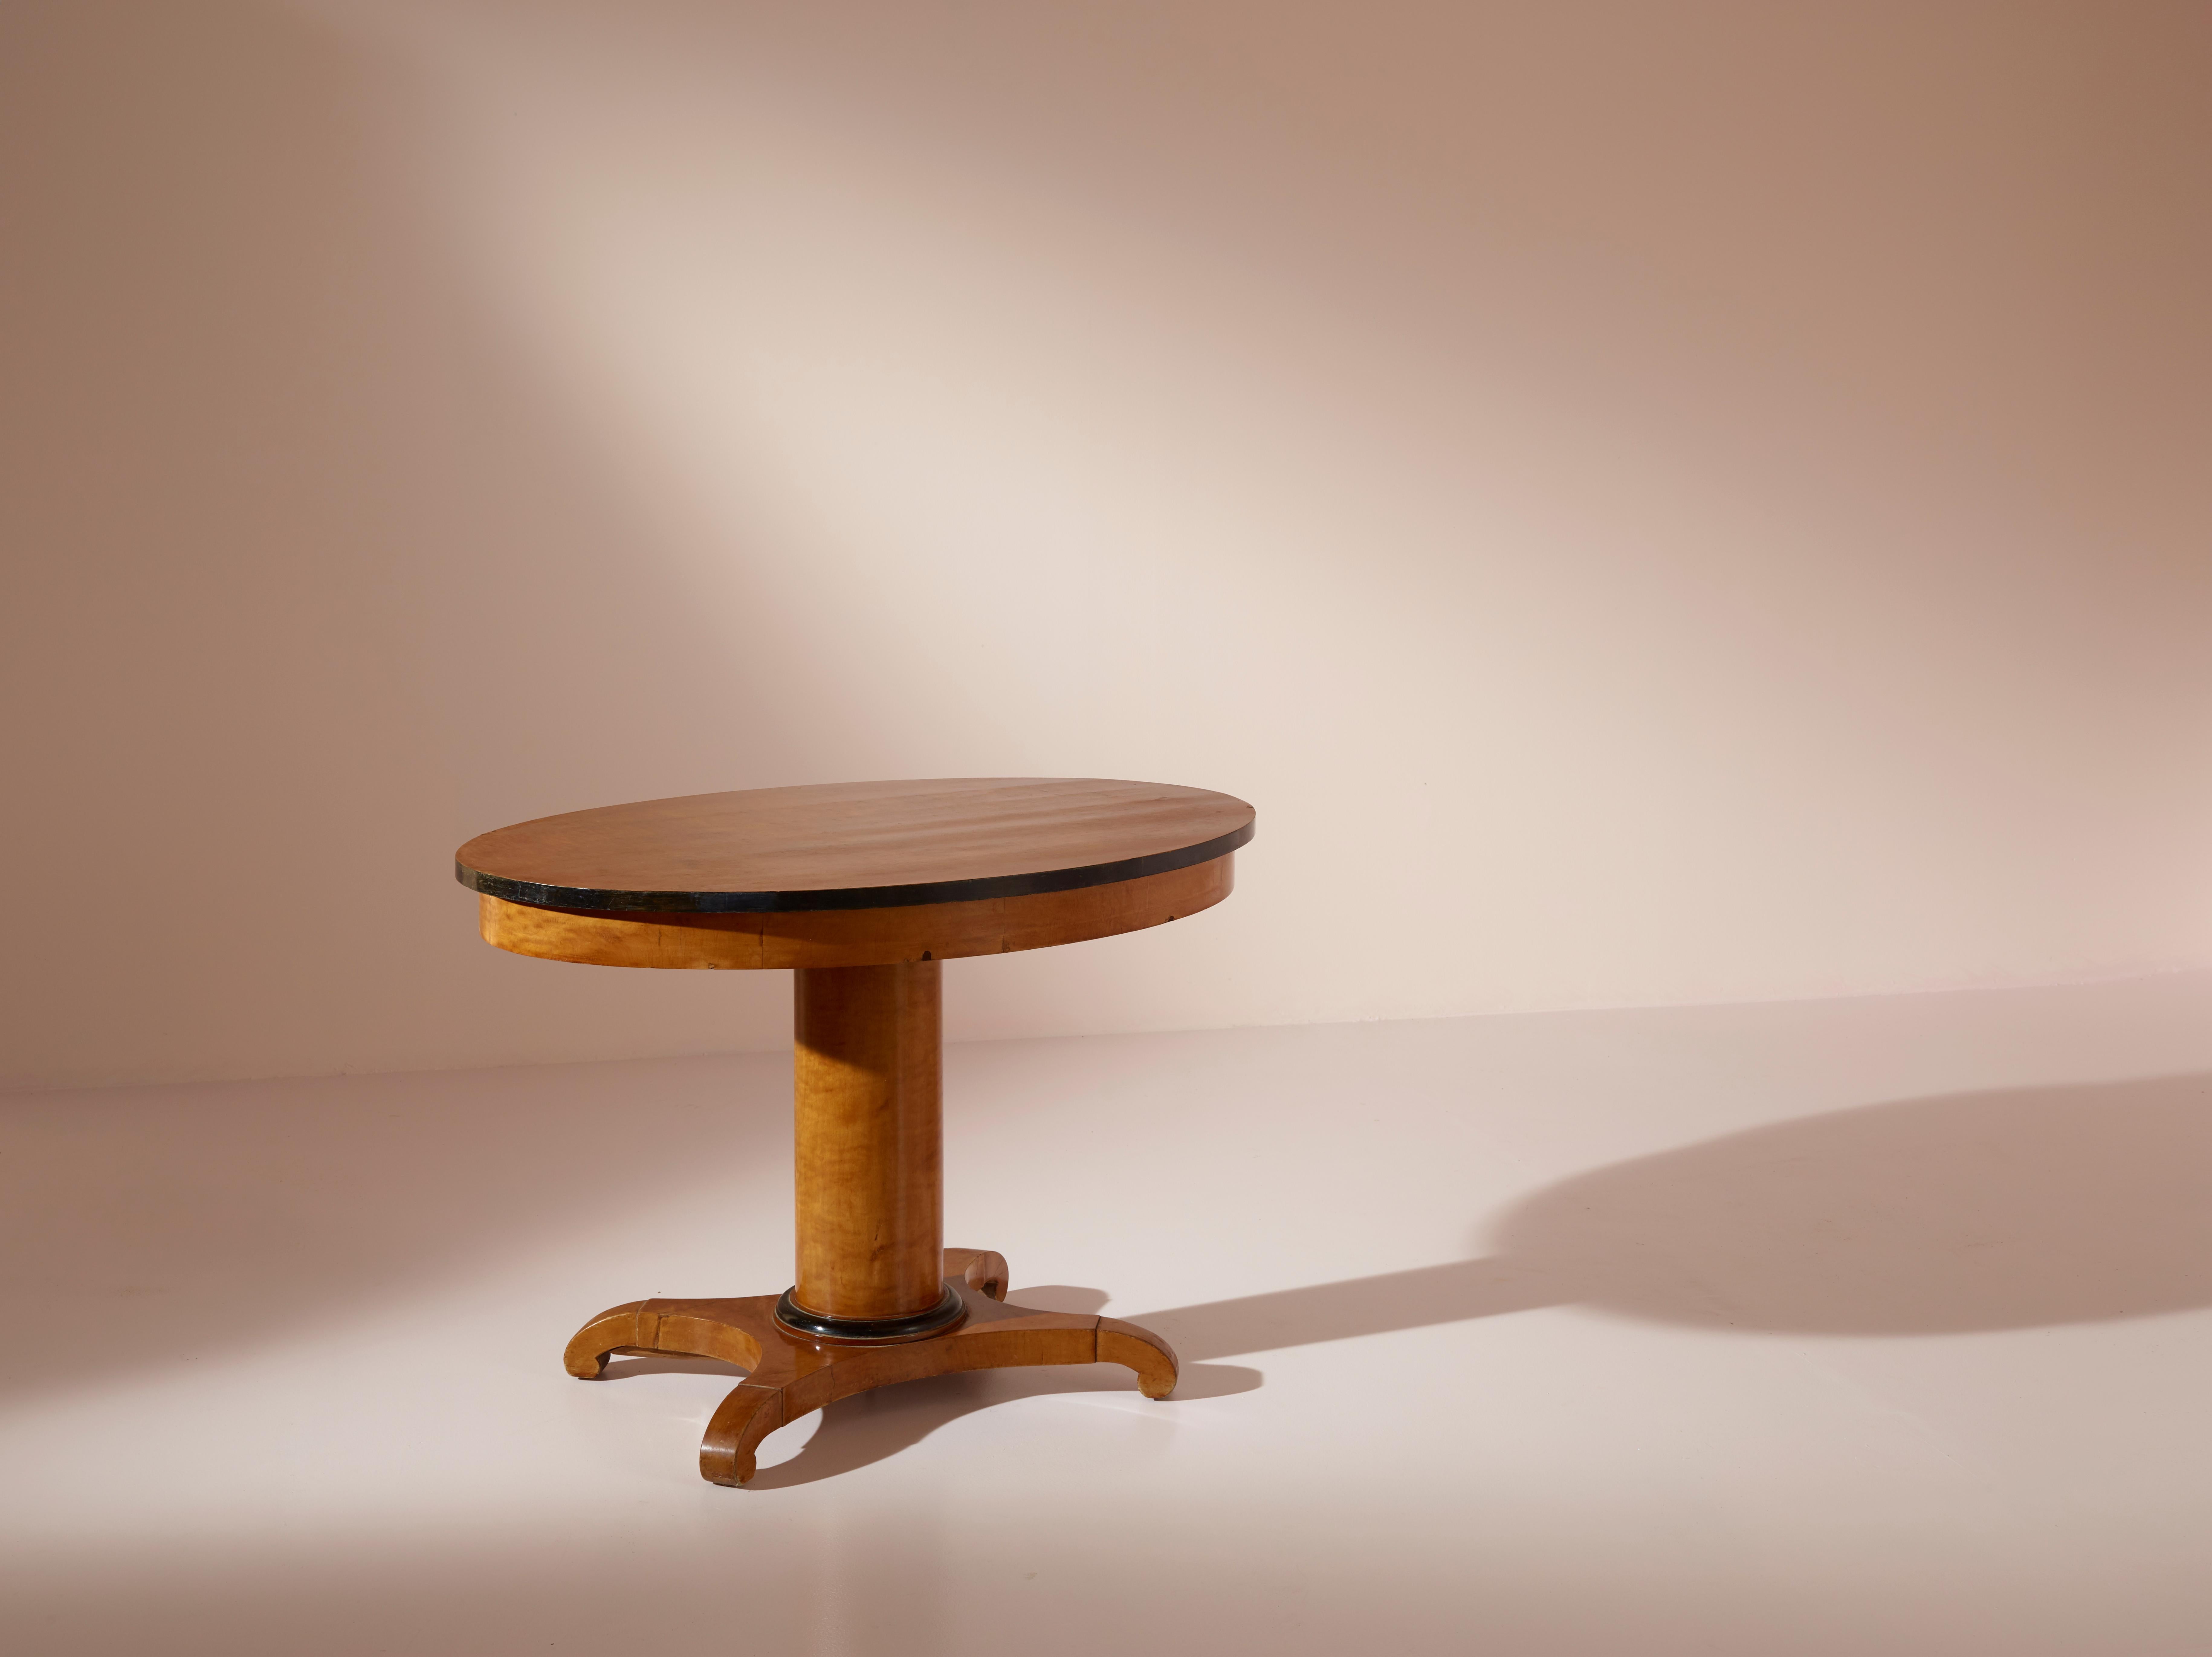 Italian Continental Biedermeier Oval Table Made in Maple with Ebonized Details